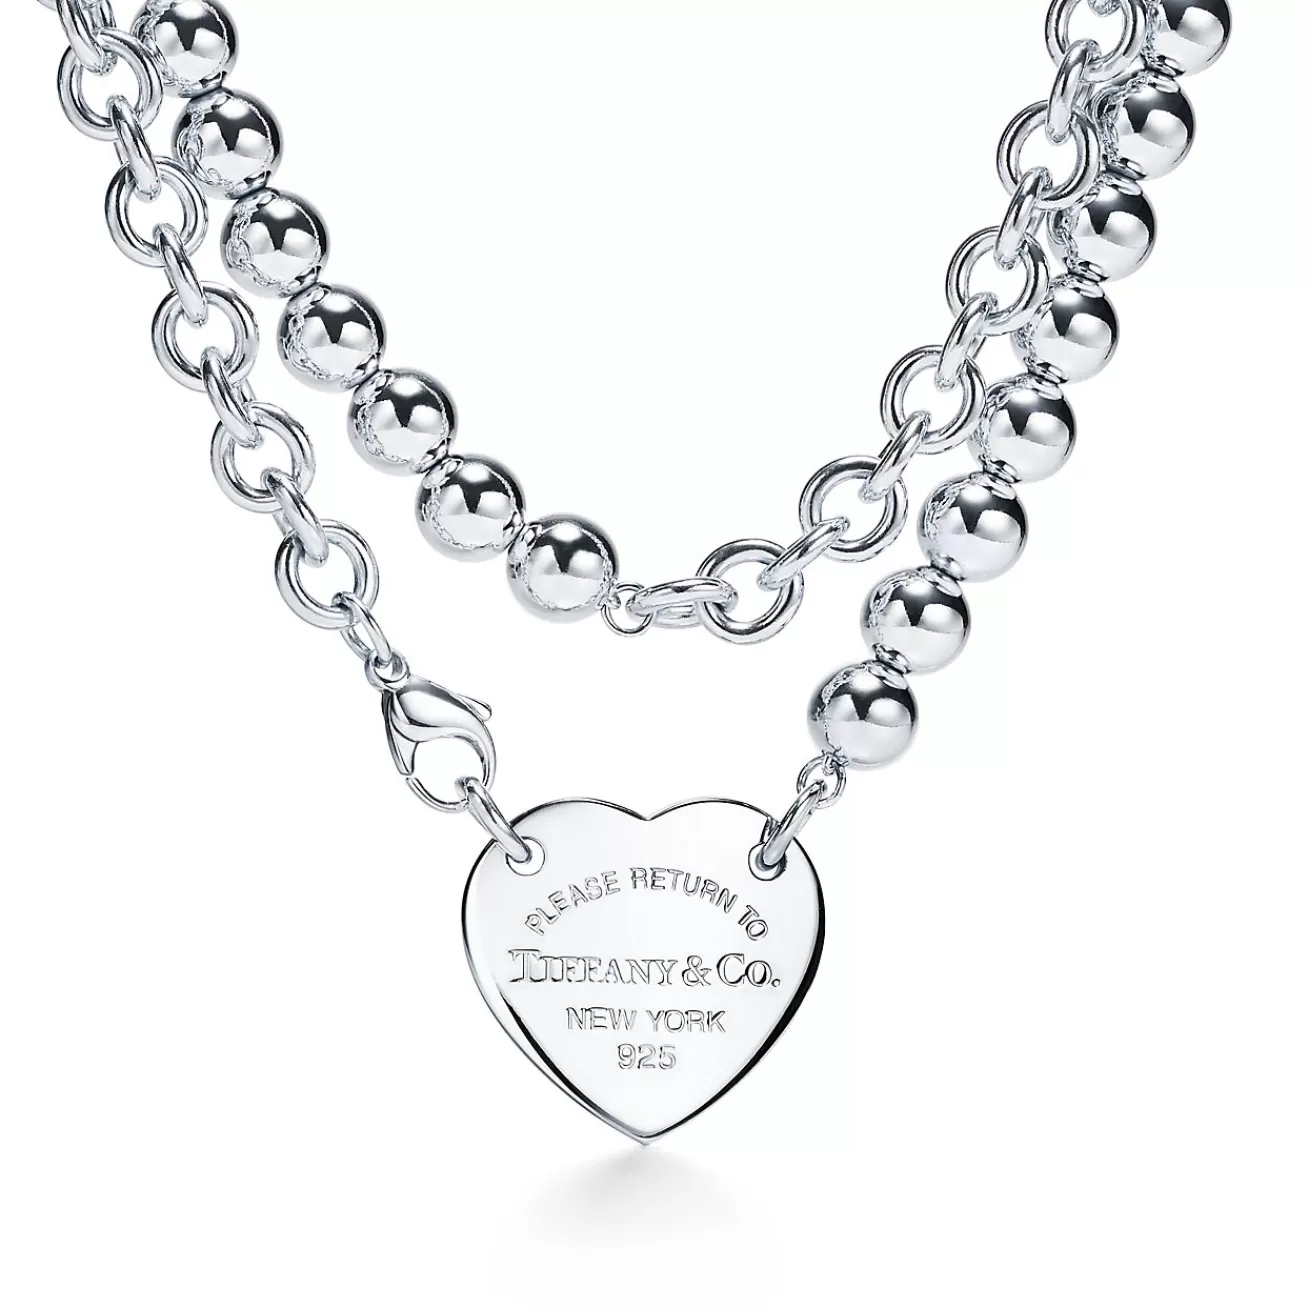 Tiffany & Co. Return to Tiffany® heart tag wrap necklace in sterling silver, 32". | ^ Necklaces & Pendants | Gifts for Her